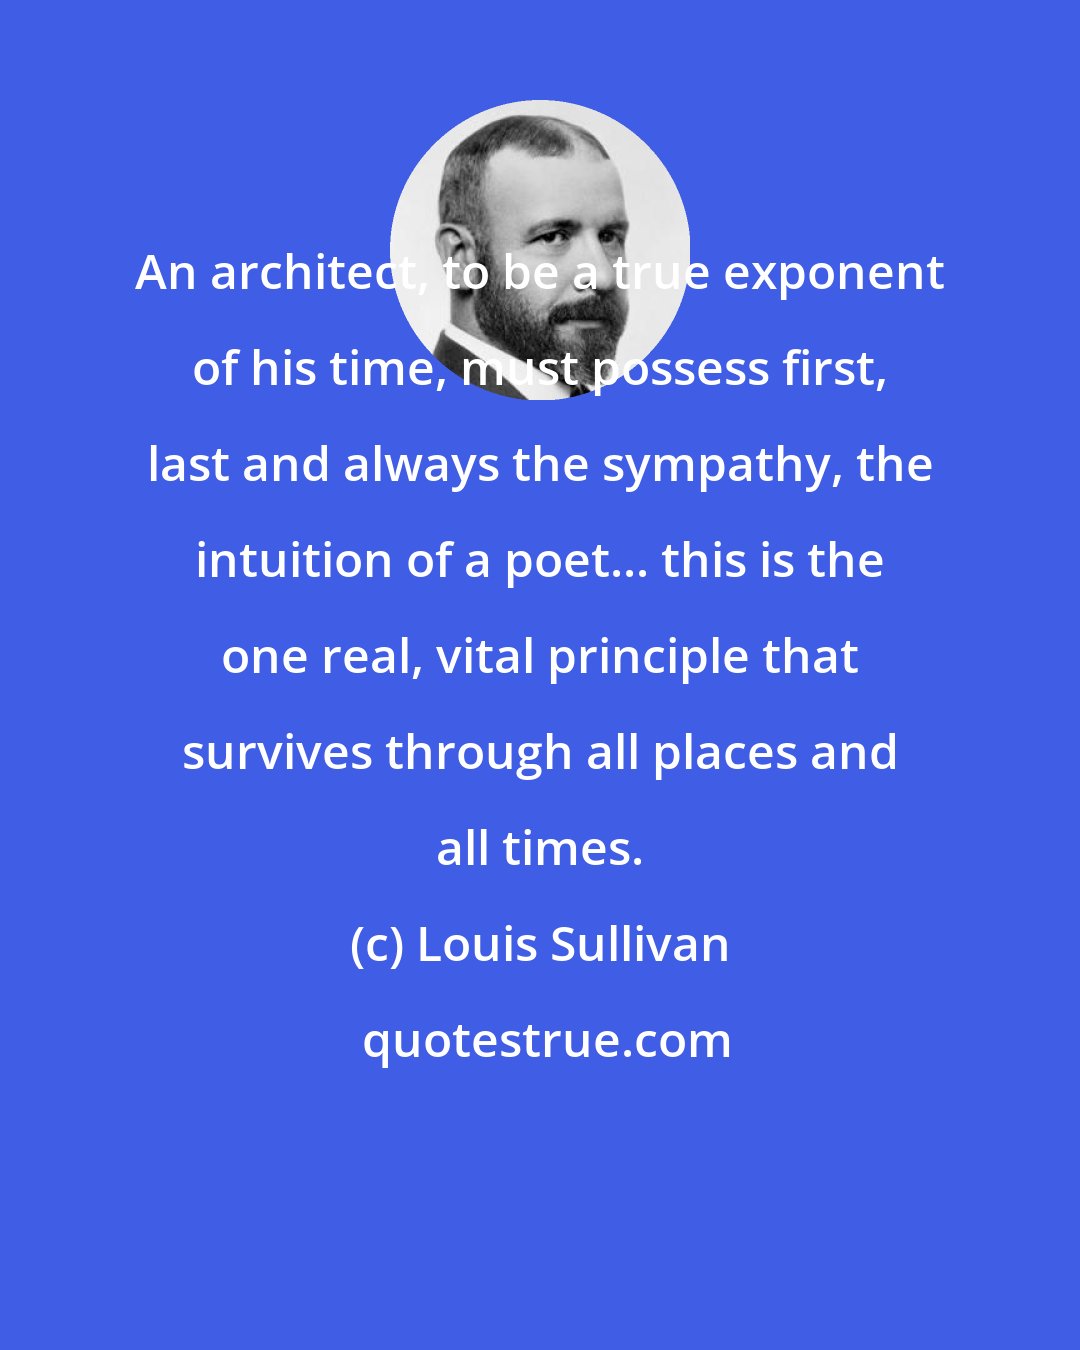 Louis Sullivan: An architect, to be a true exponent of his time, must possess first, last and always the sympathy, the intuition of a poet... this is the one real, vital principle that survives through all places and all times.